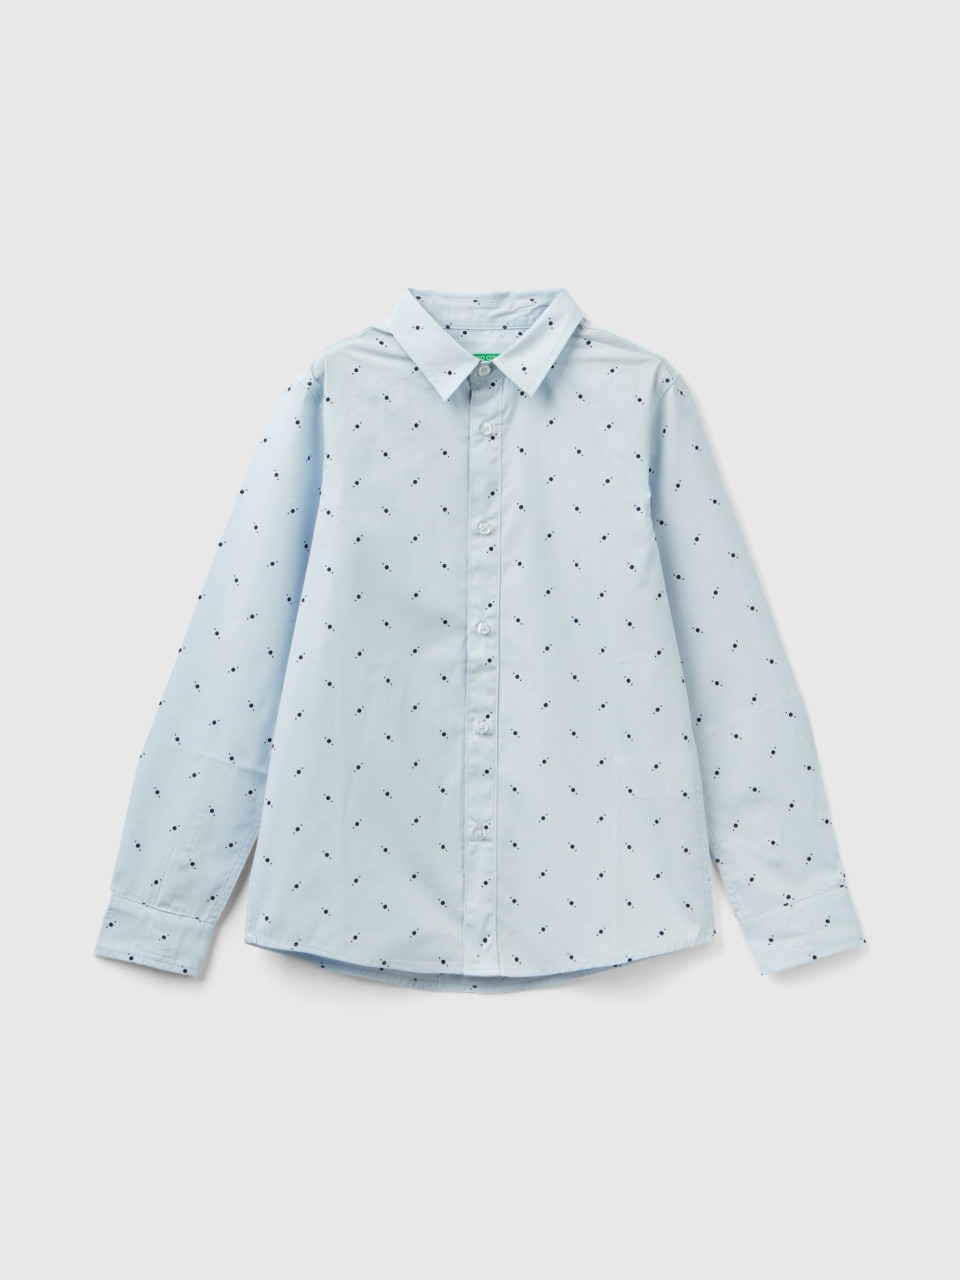 Benetton, Slim Fit Shirt With Micro Pattern, Sky Blue, Kids